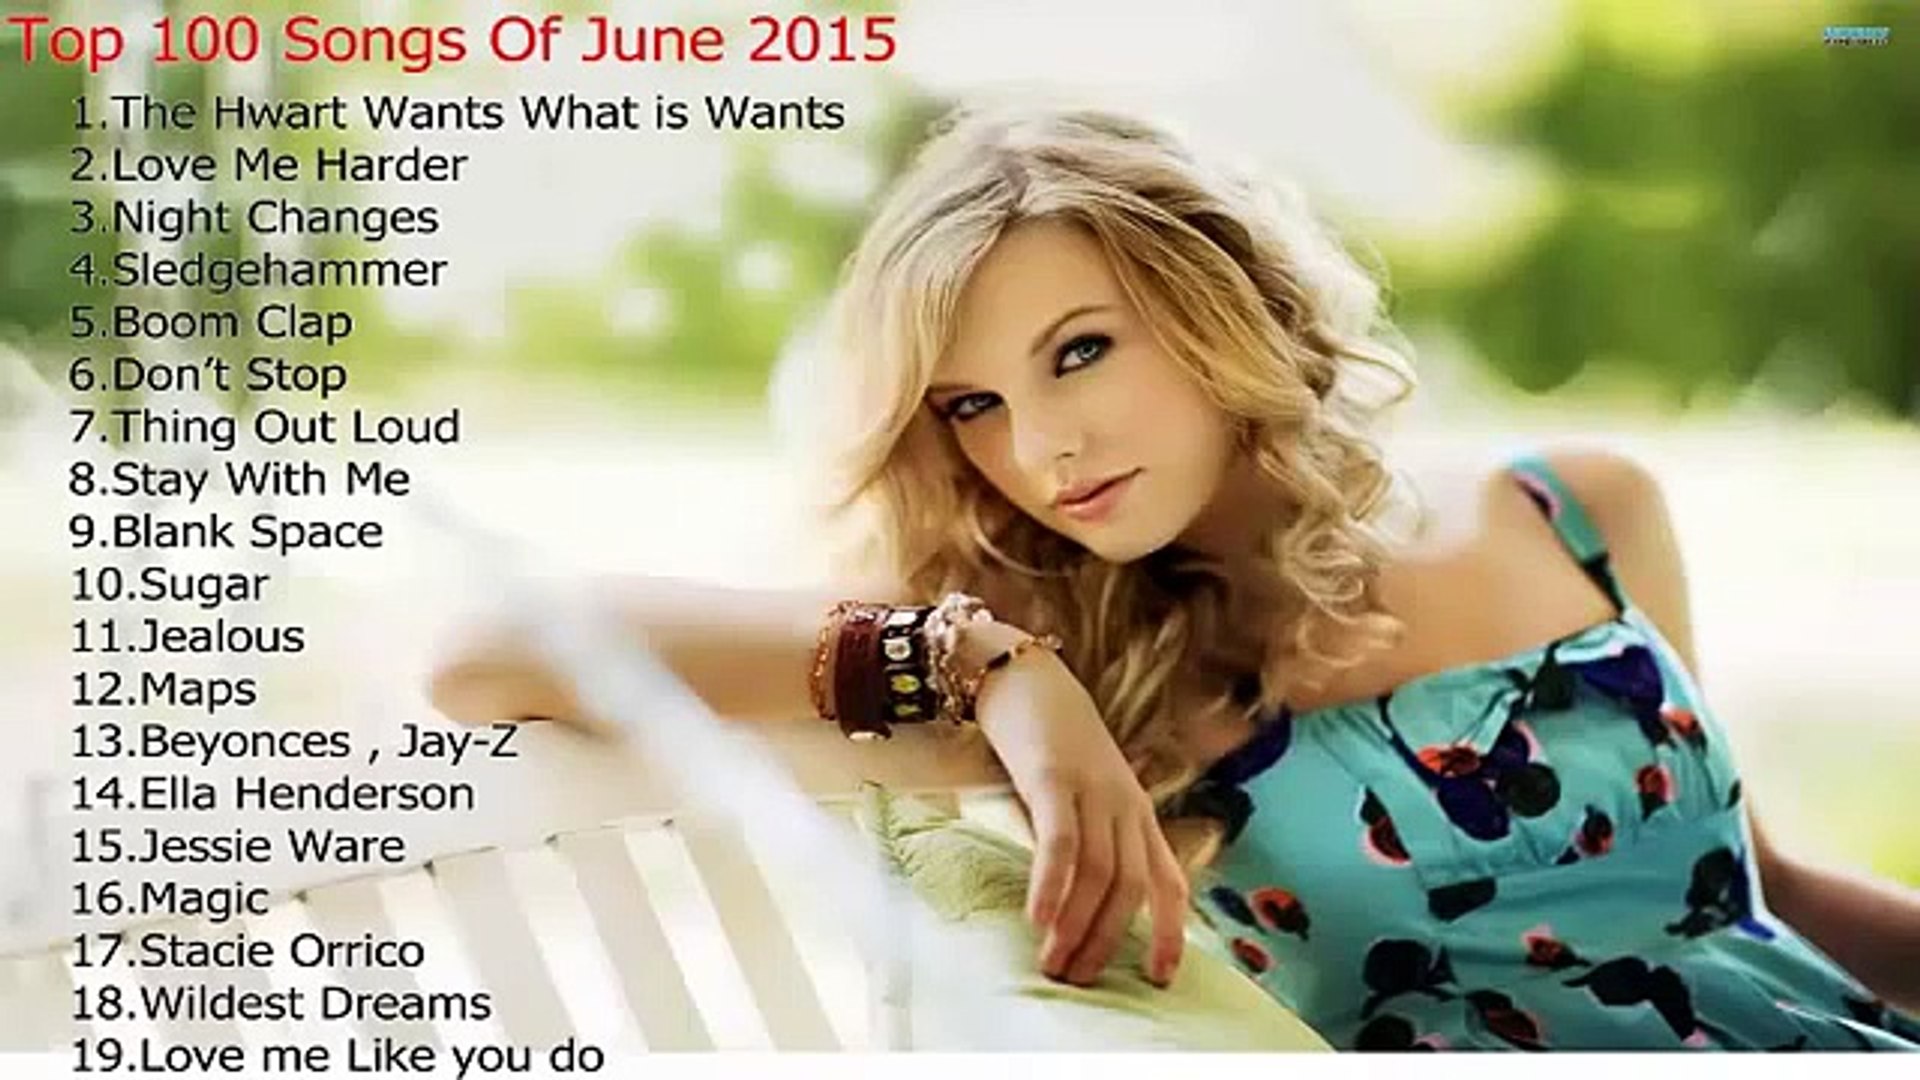 Top 100 New Songs Of 2015 Best Hits Chart of Billboard Music English Love Songs